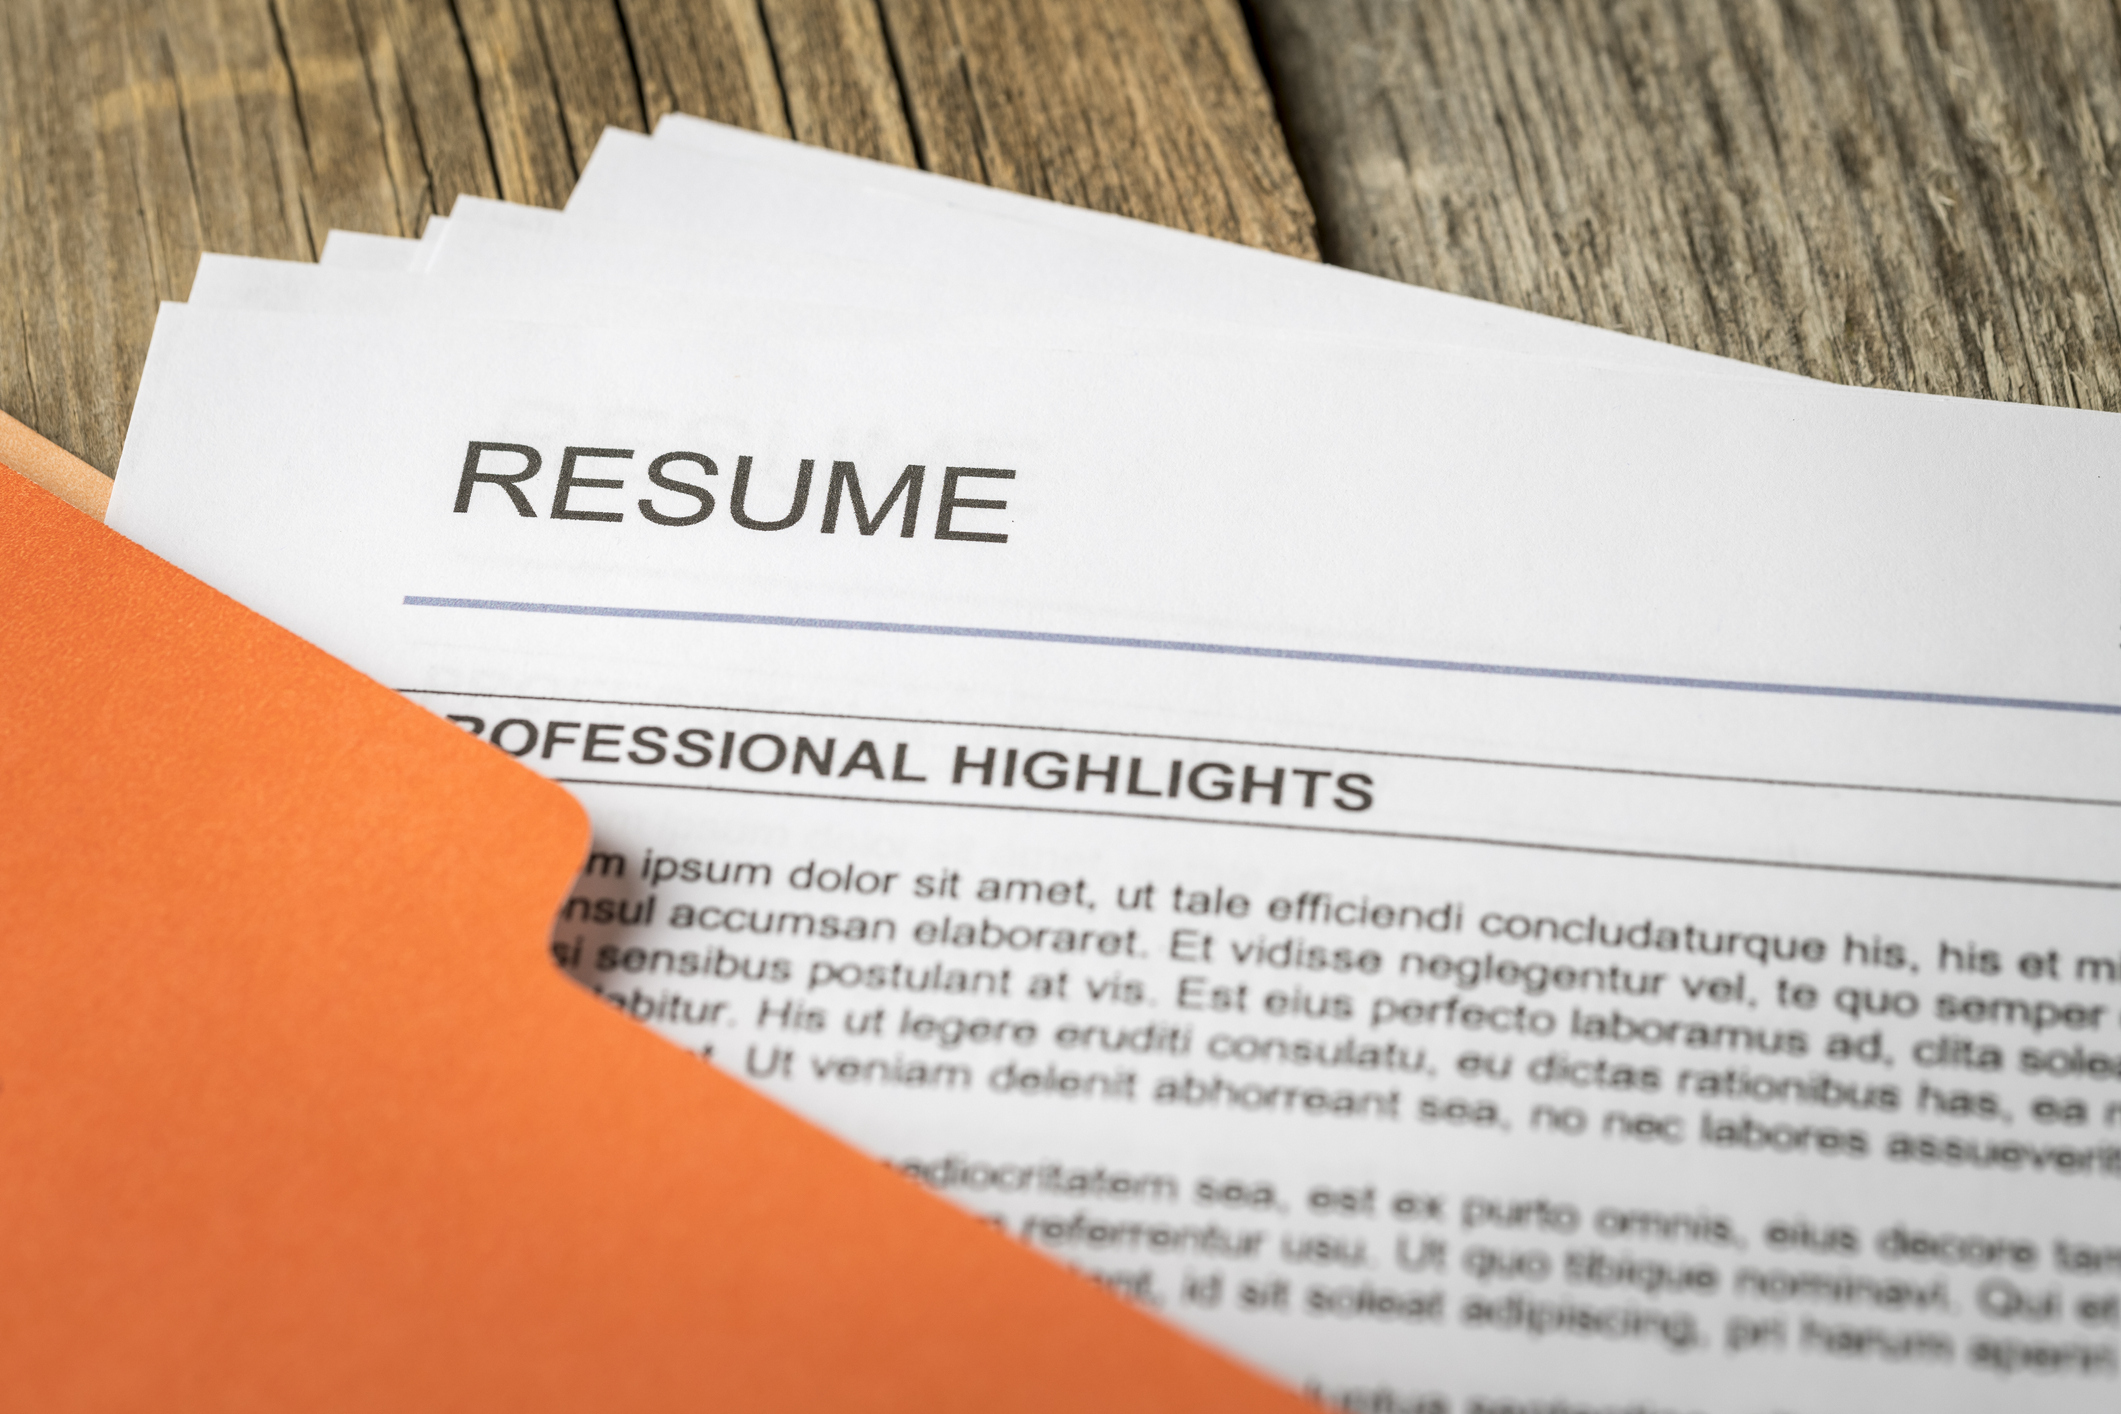 Here’s Why Your Resume Keeps Getting Lost in Cyberspace